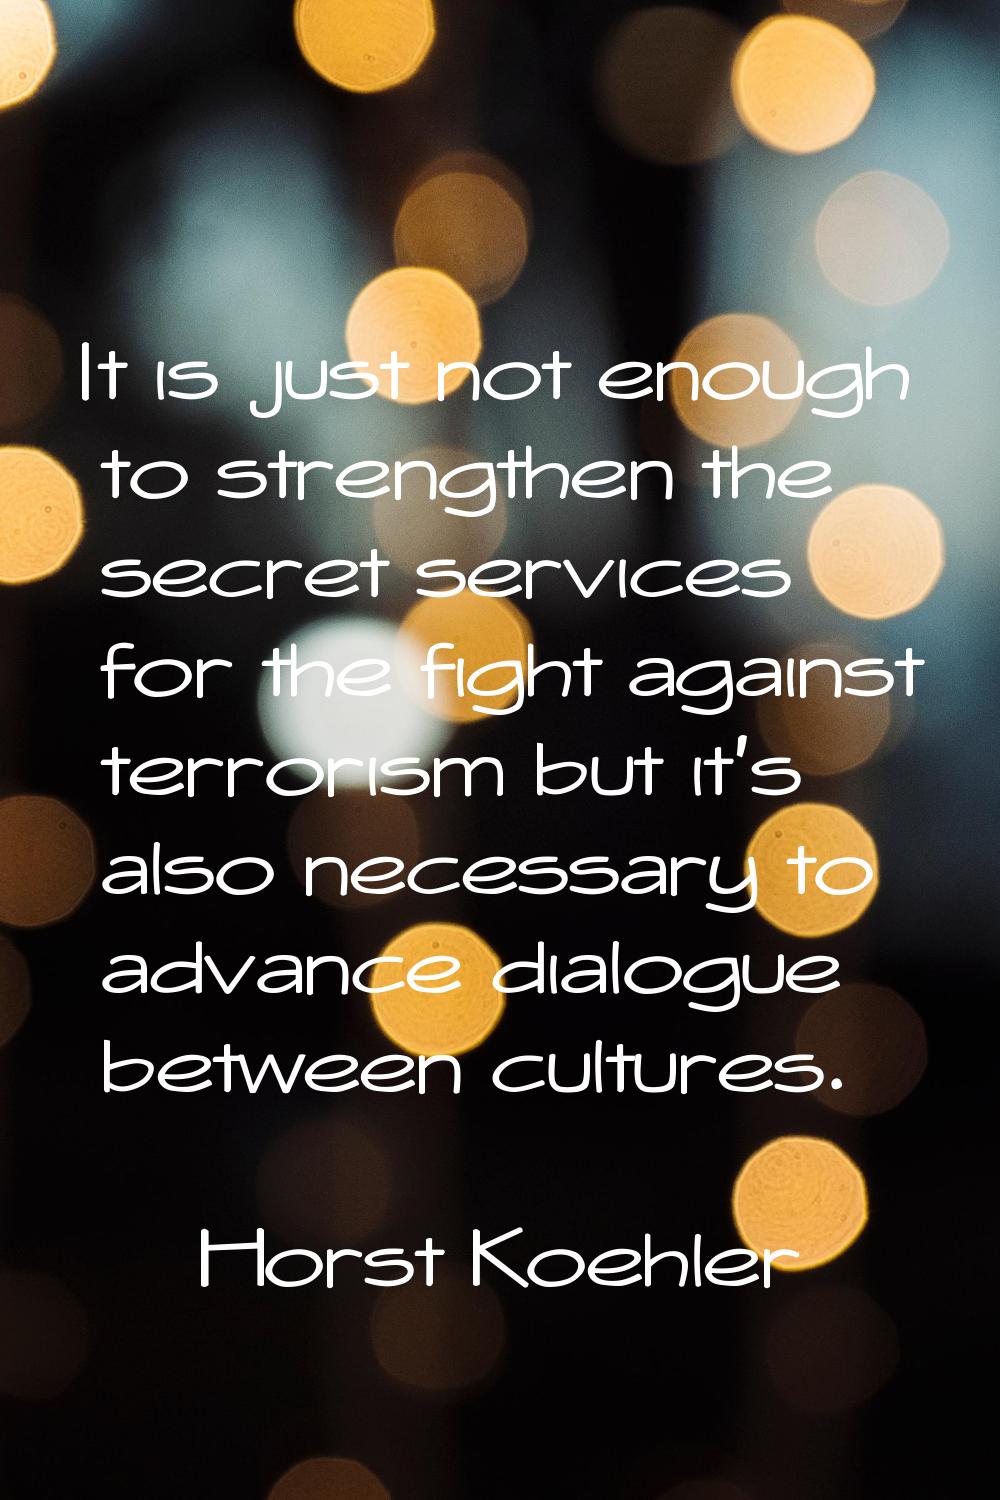 It is just not enough to strengthen the secret services for the fight against terrorism but it's al